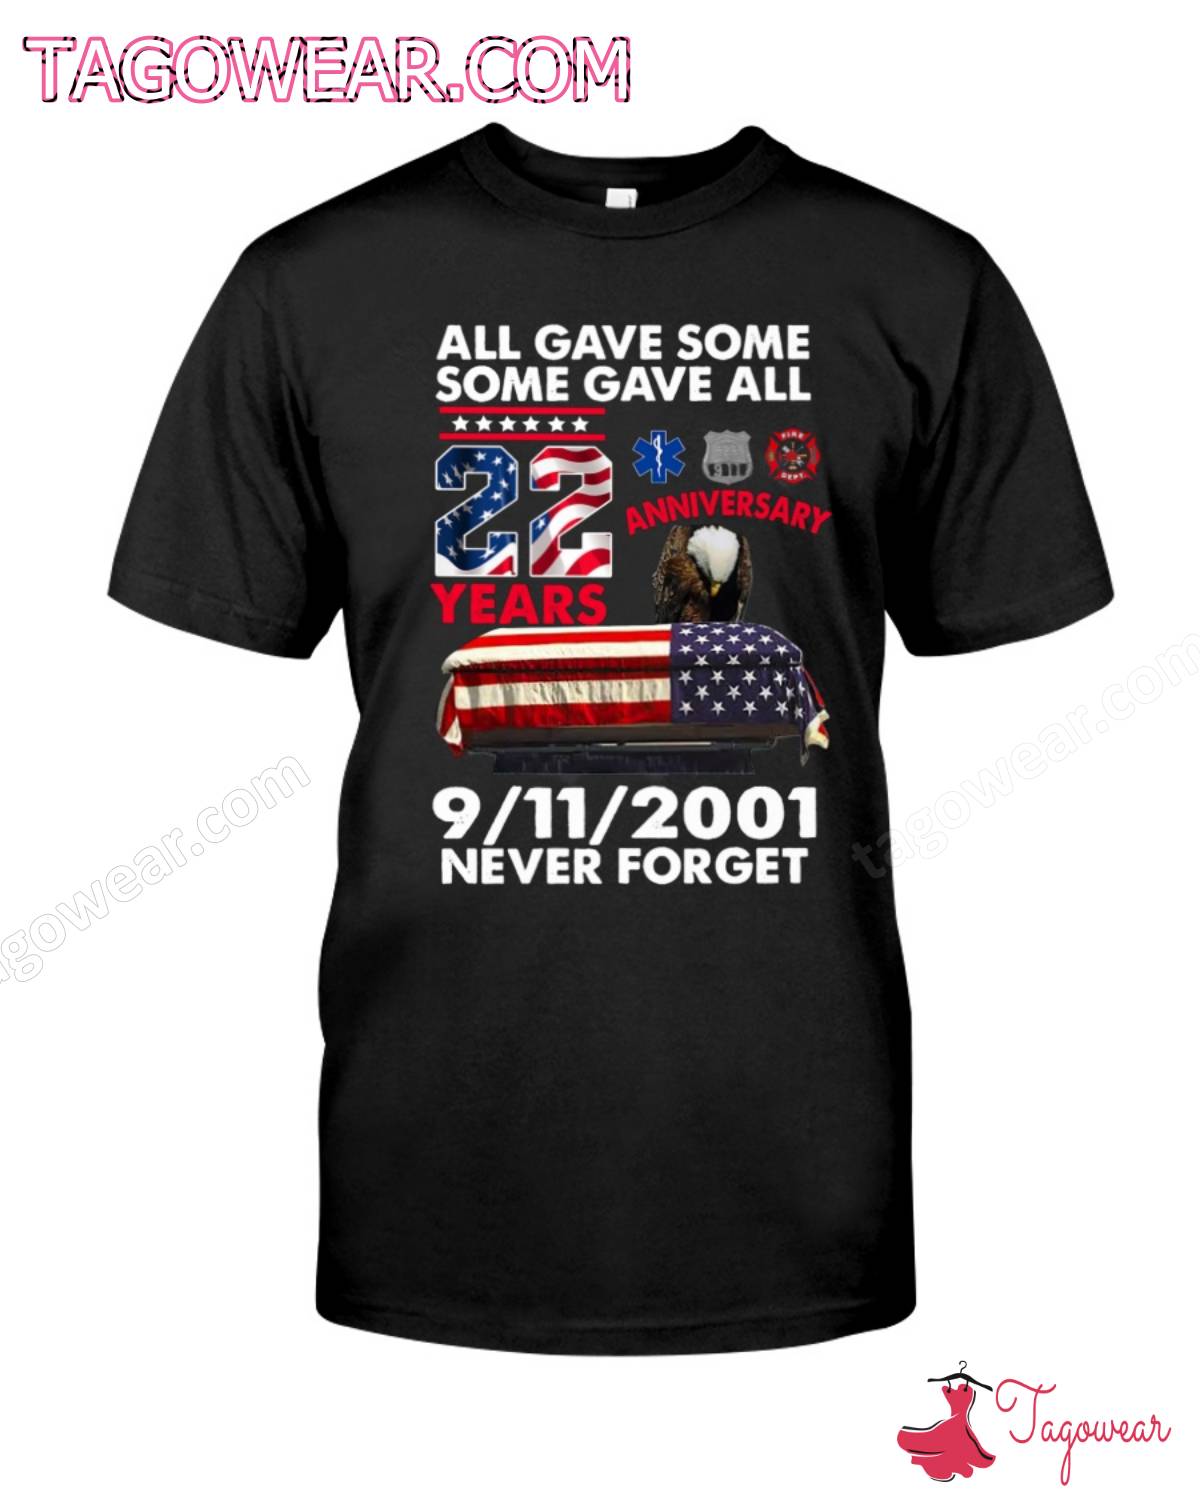 All Gave Some Some Gave All 9-11-2001 Never Forget 22 Years Anniversary Shirt